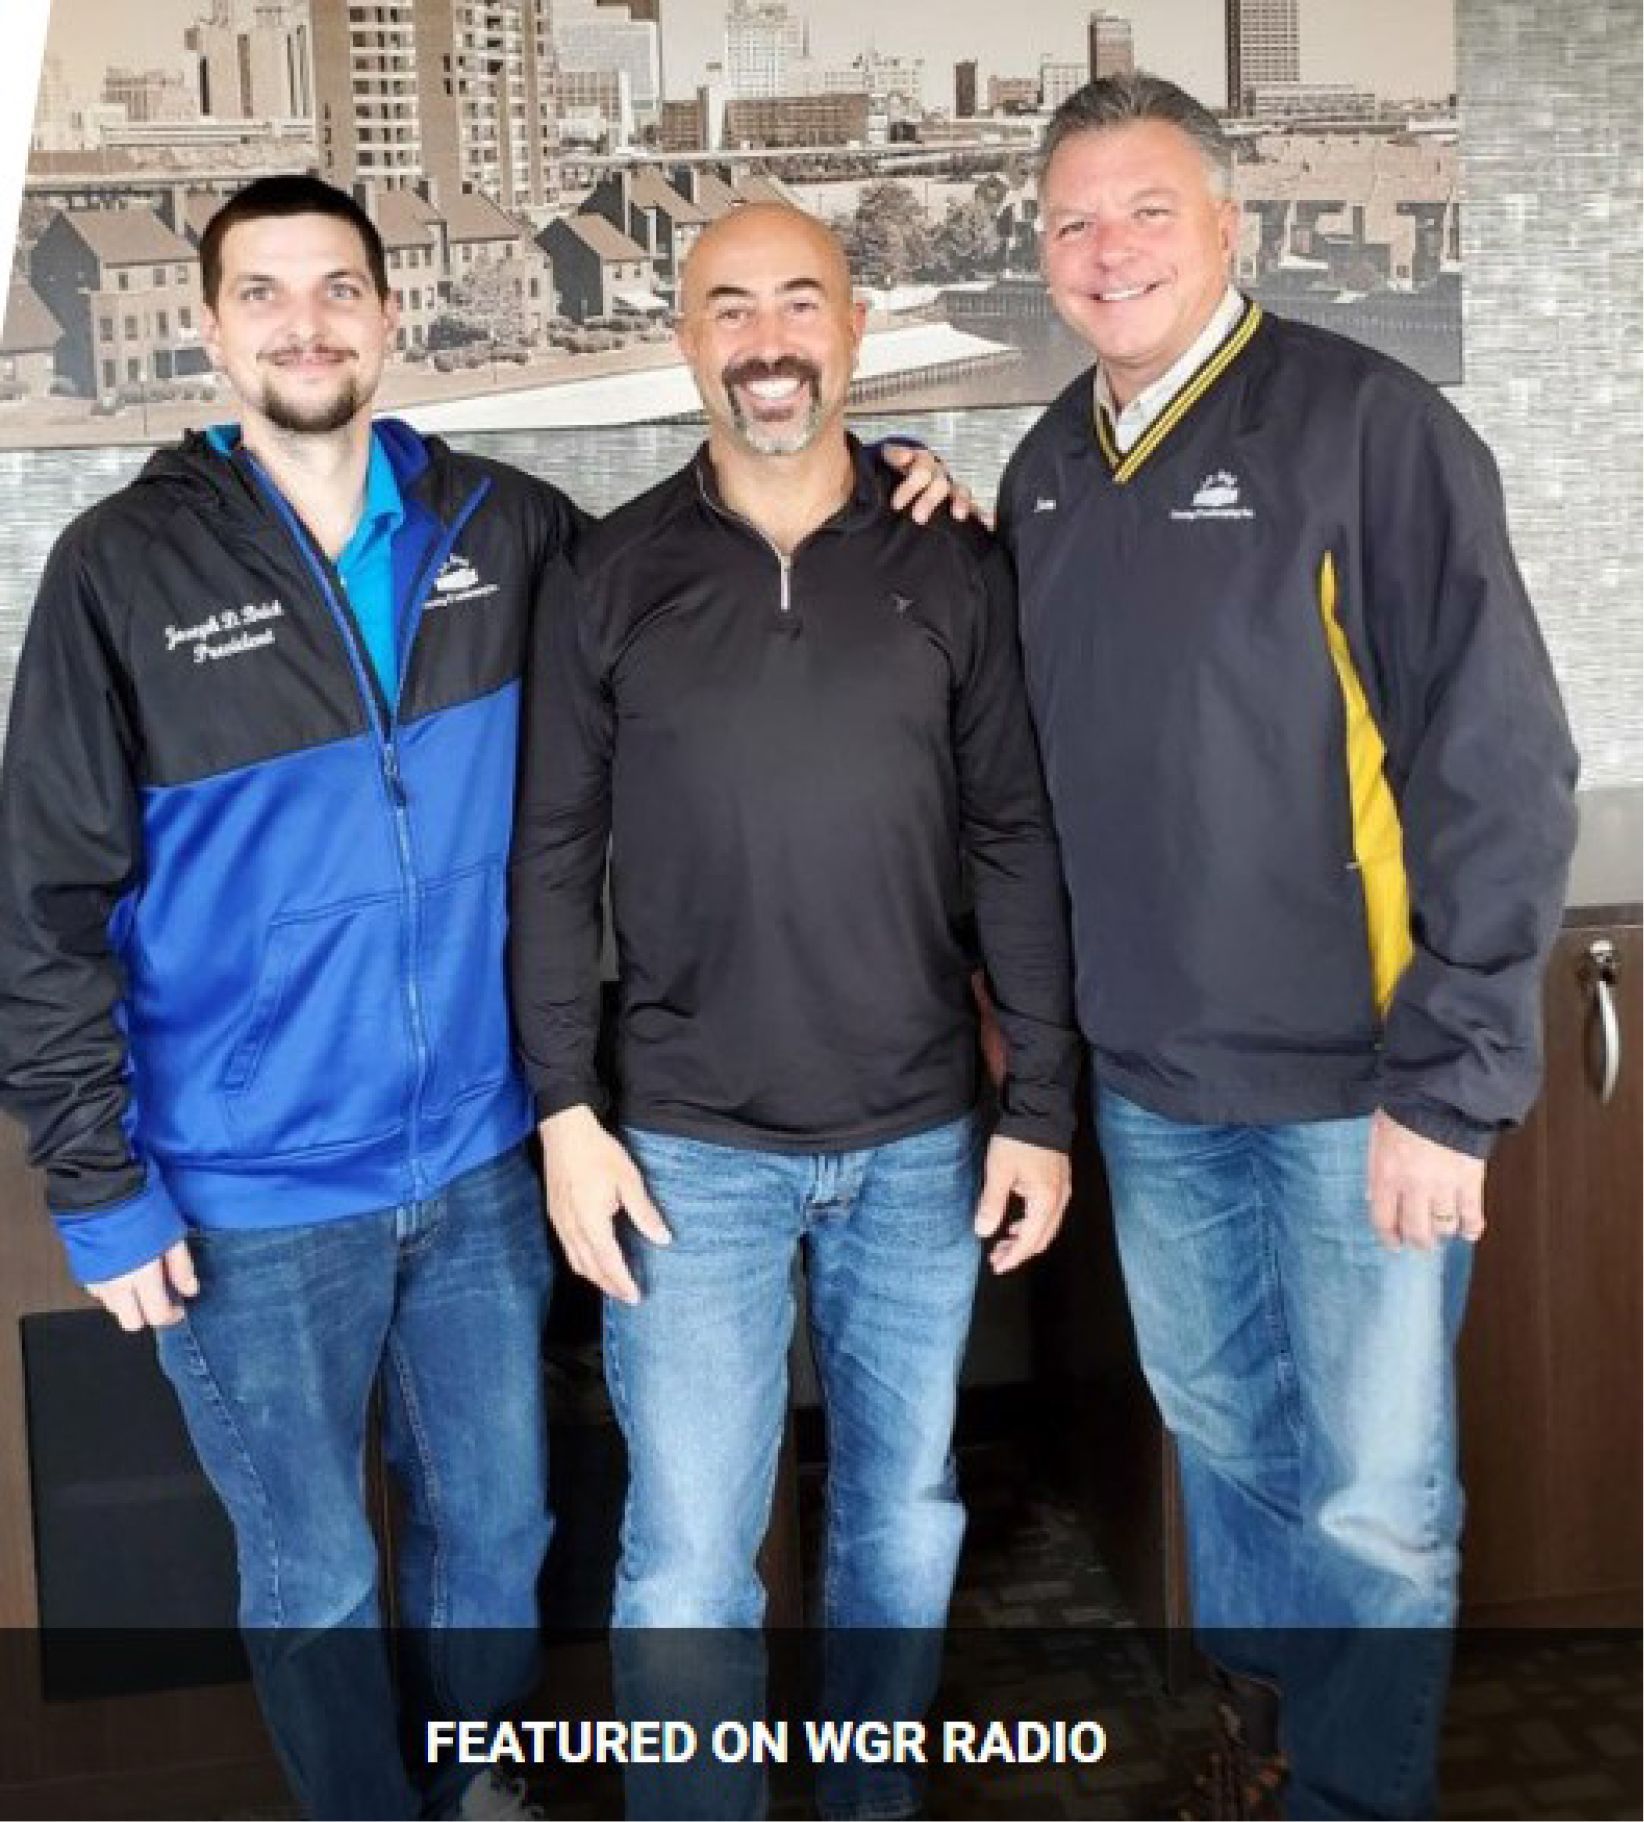 Three men are posing for a picture with the caption featured on WGR radio